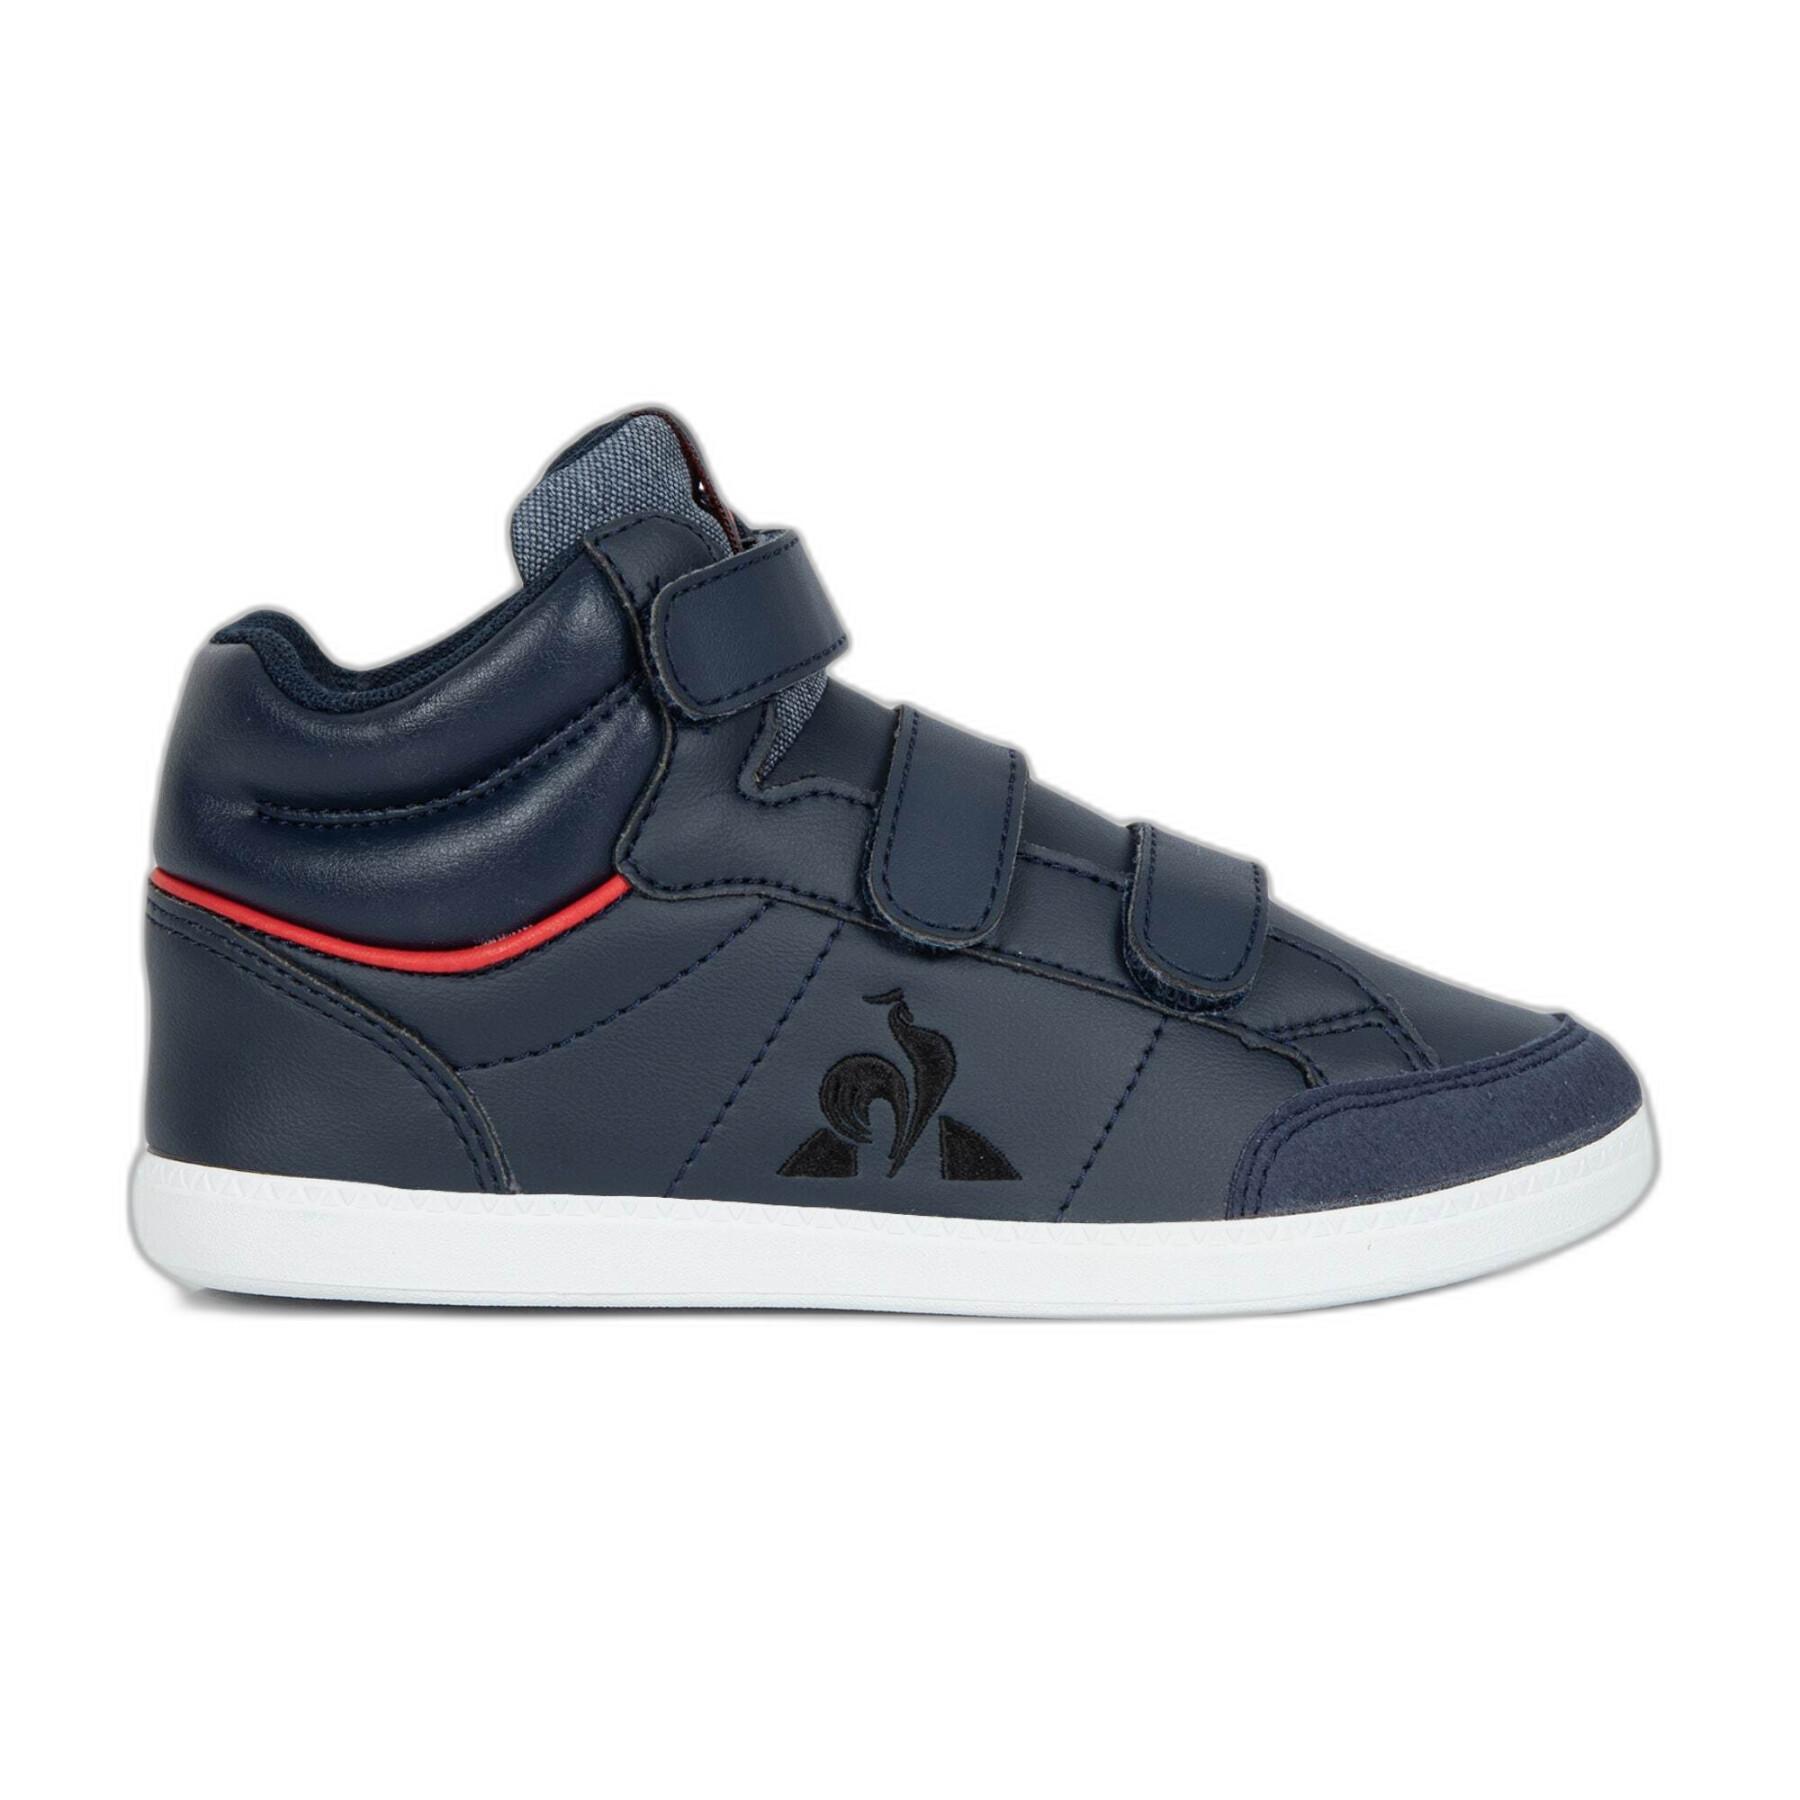 Niedrige Sneakers Kinder Le Coq Sportif Court Arena Ps Workwear